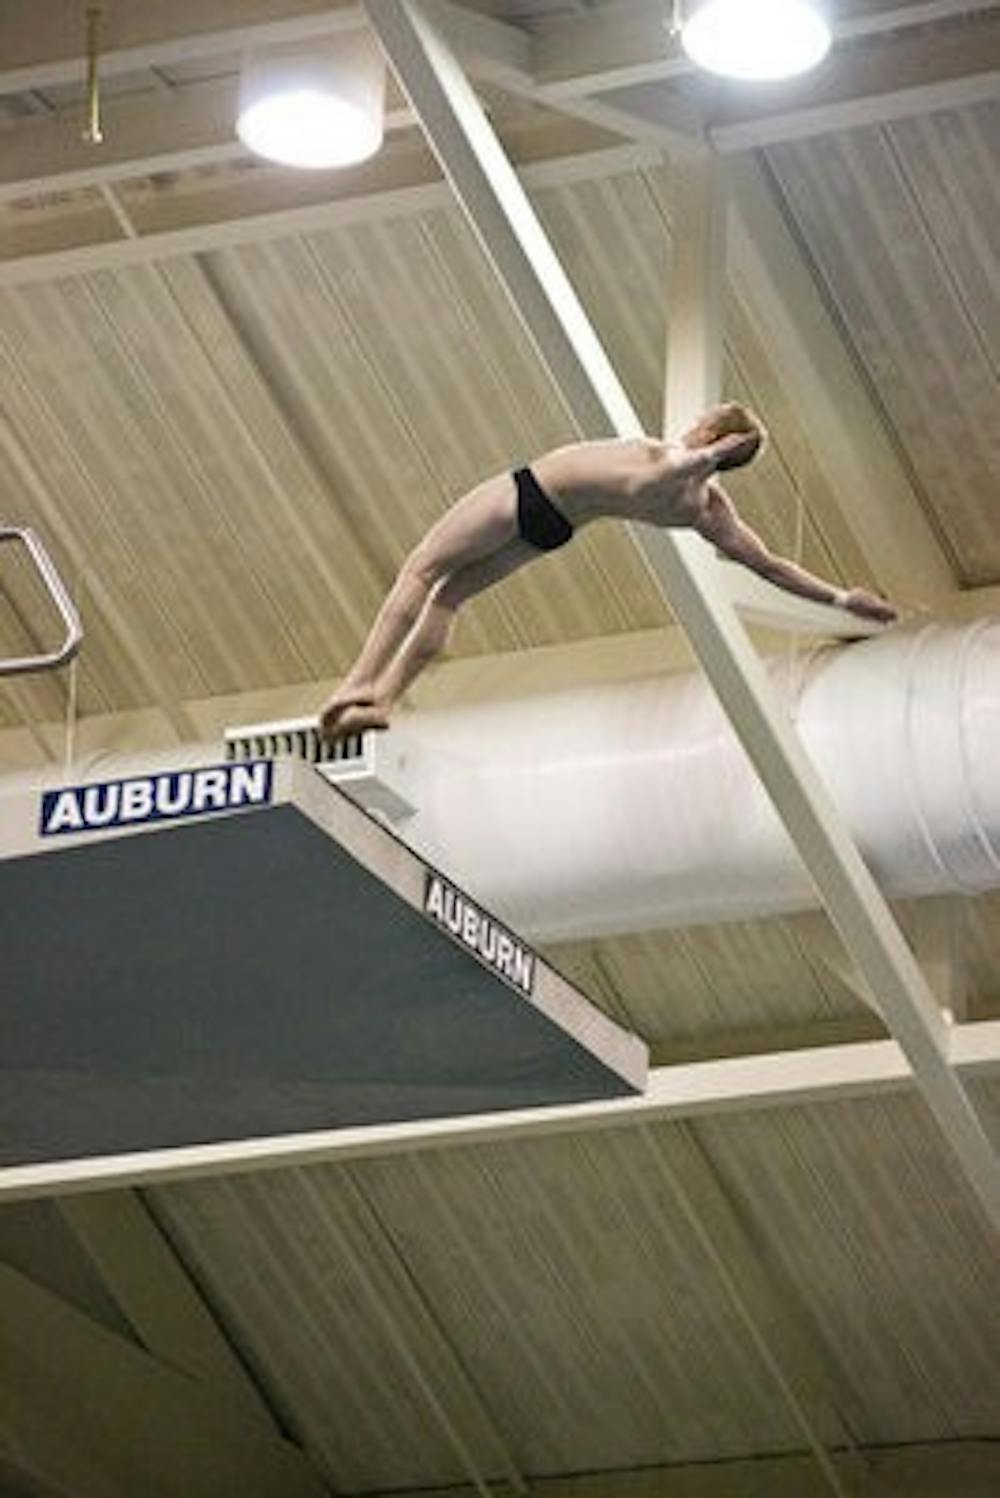 The Auburn swimming and diving teams practice before the invitational. (File photo)